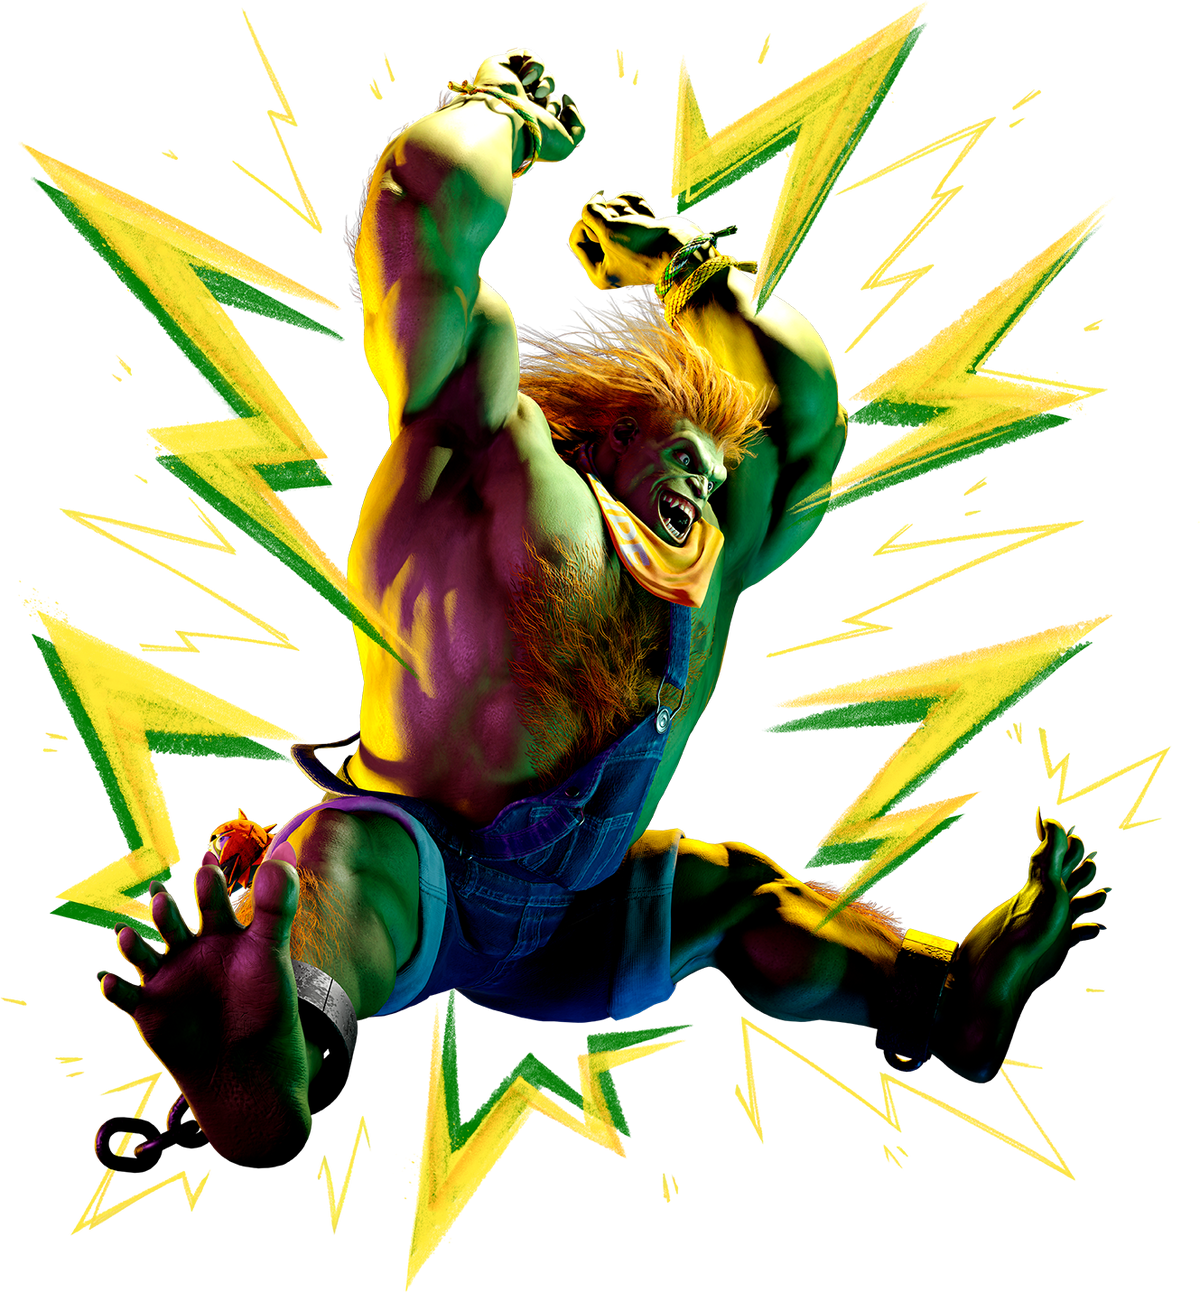 Bryan Rose on X: blanka defeat screen in Street Fighter II tbh what 6 year  old wouldn't be creeped out by this  / X